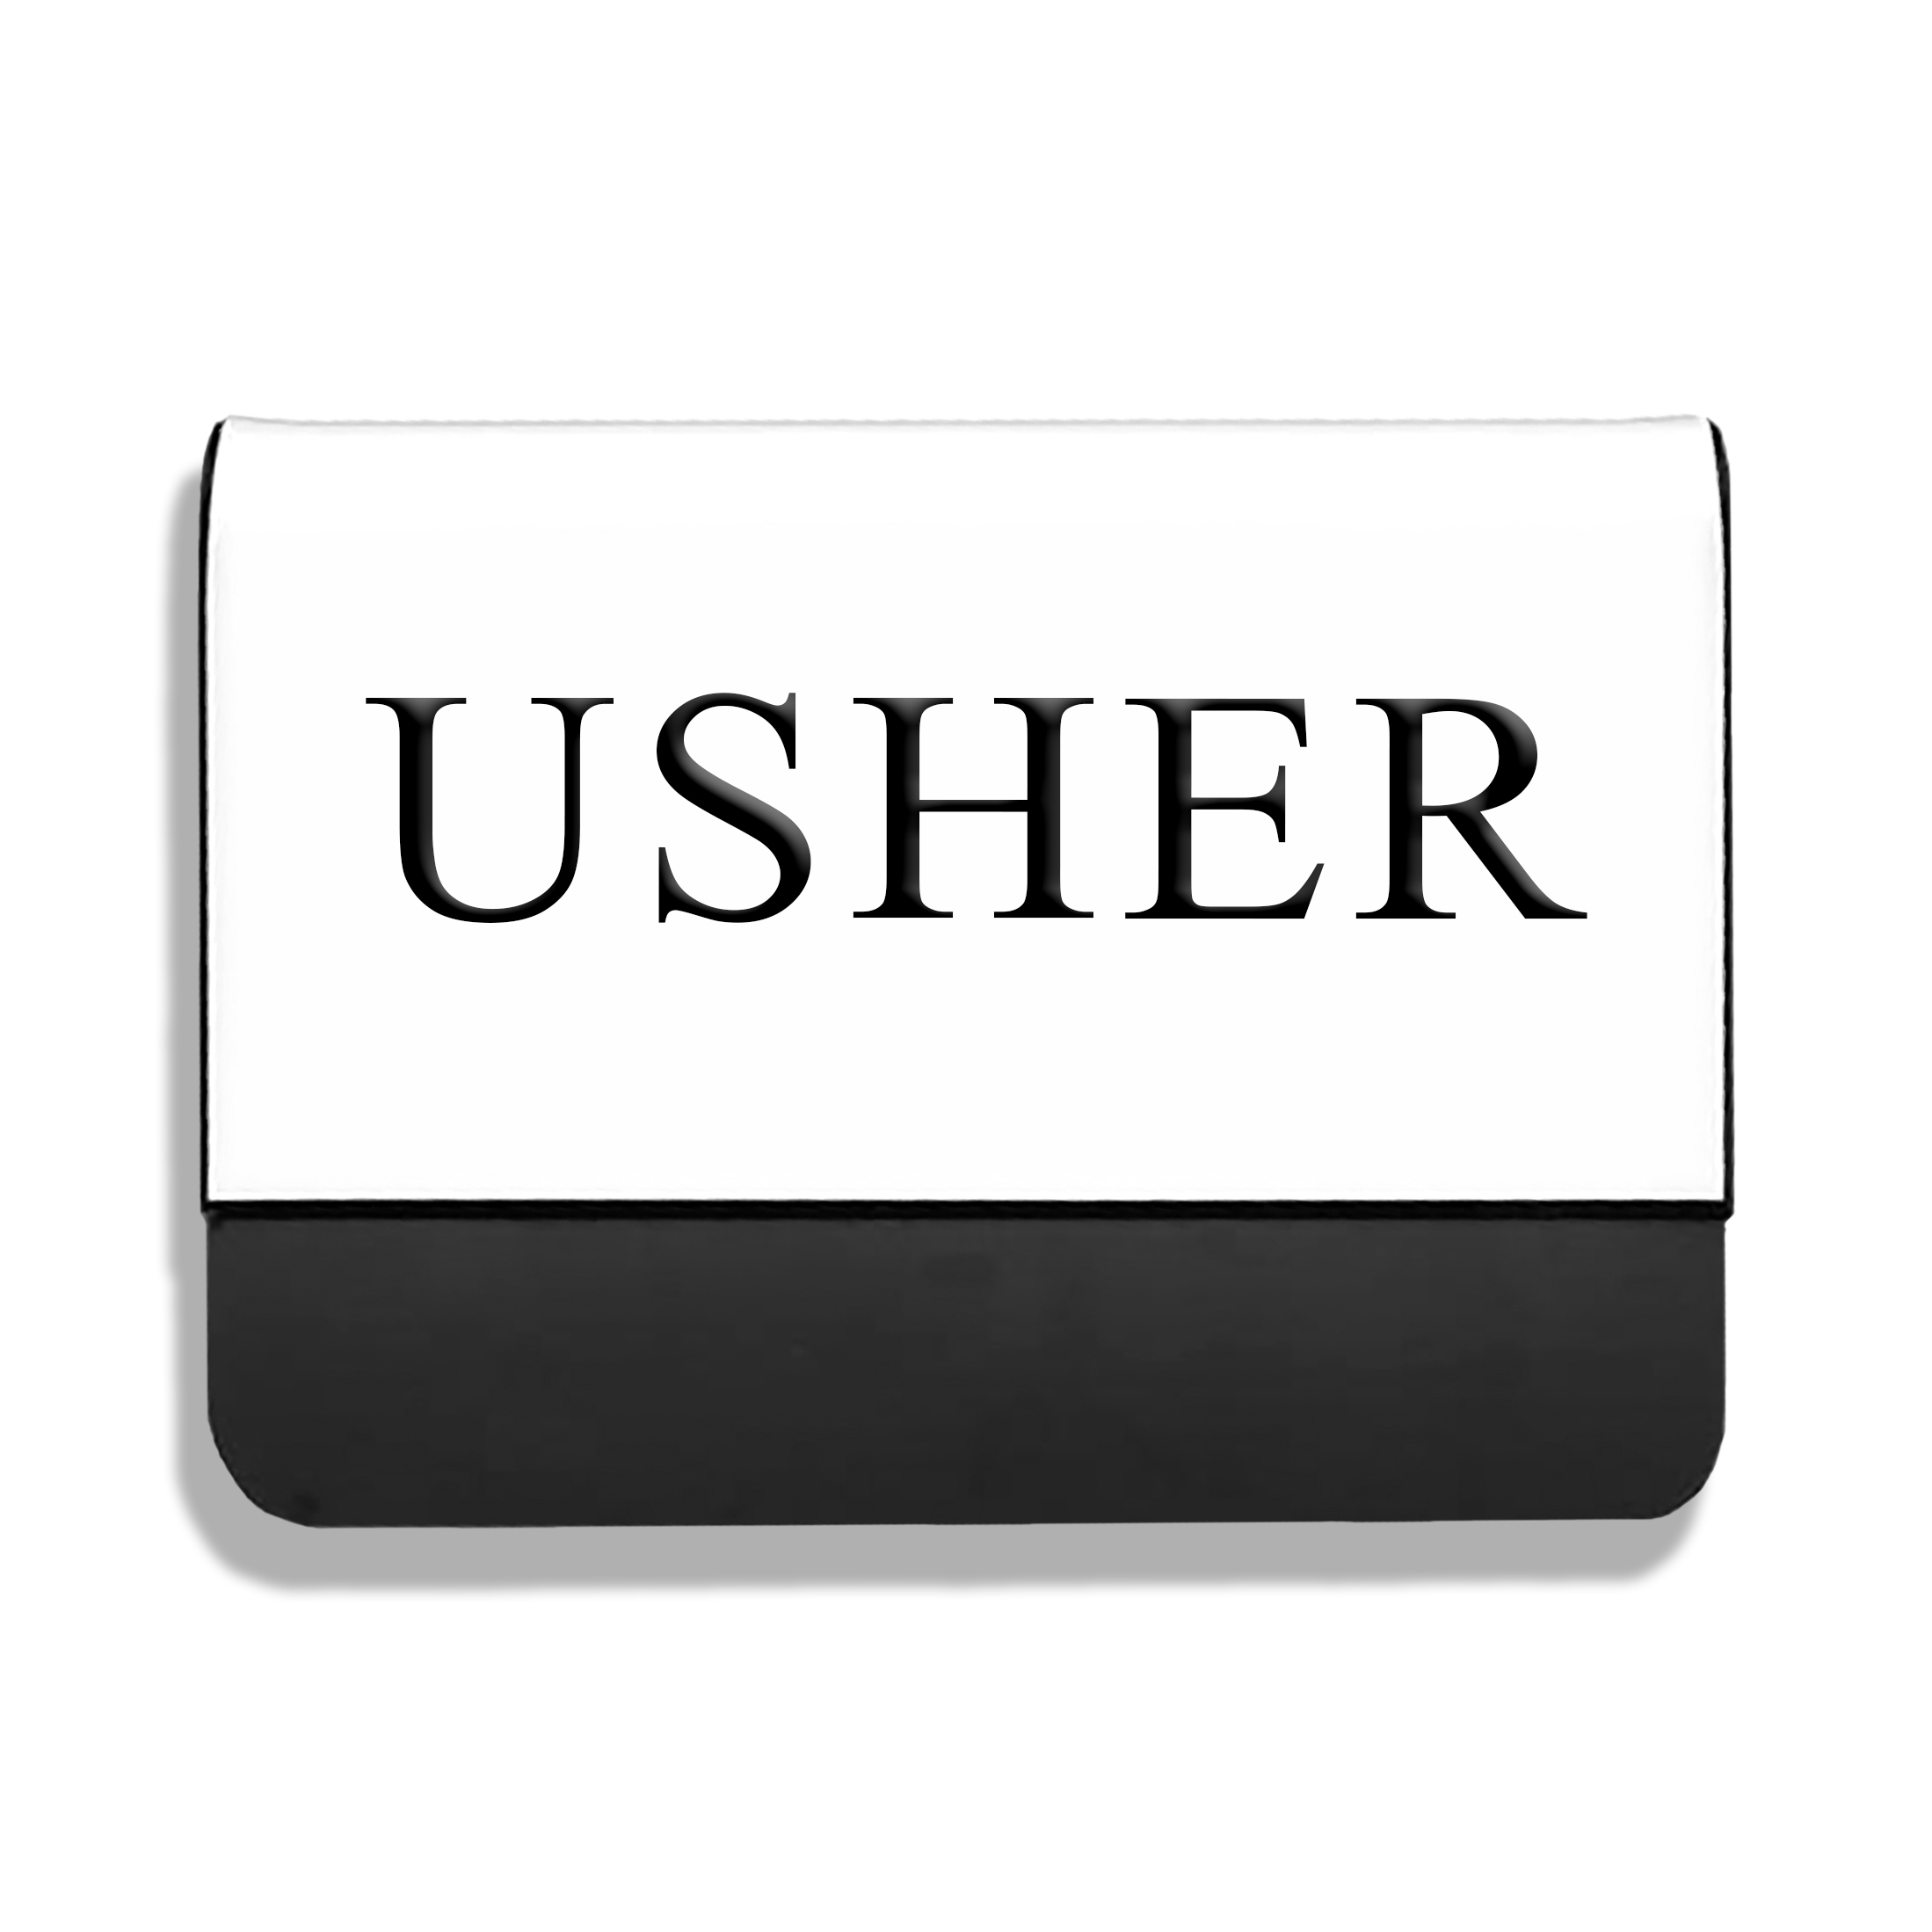 Set of 12 Maroon with White Letters Engraved Usher Badges  SPECIAL PRICE!!! 